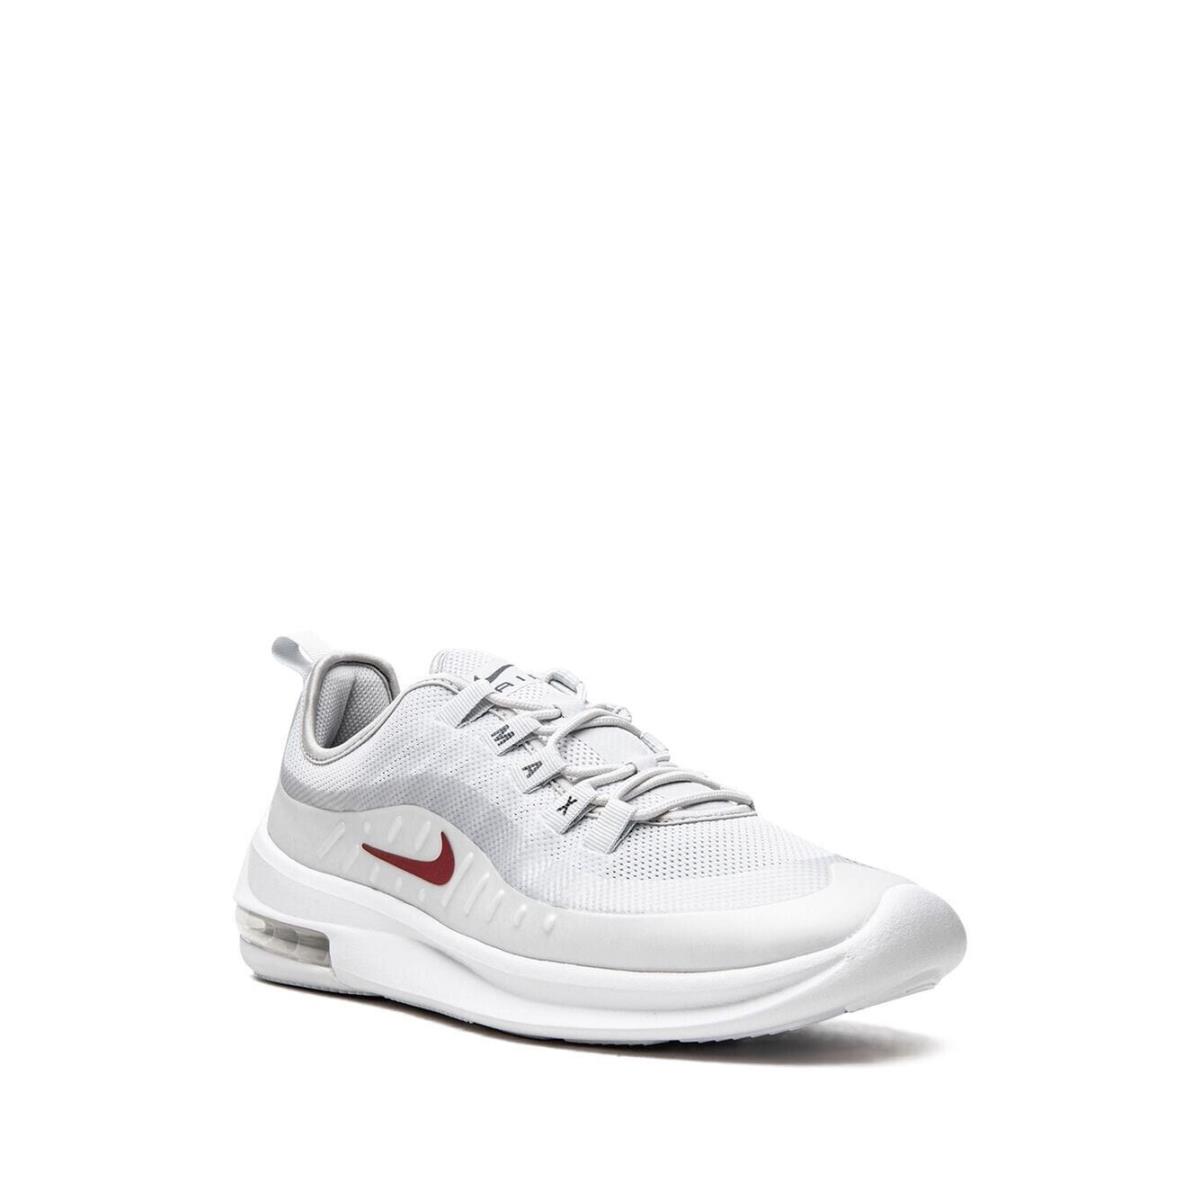 Nike Air Max Axis Pure Platinum Running Shoes AA2168 003 - Size 10 Womens